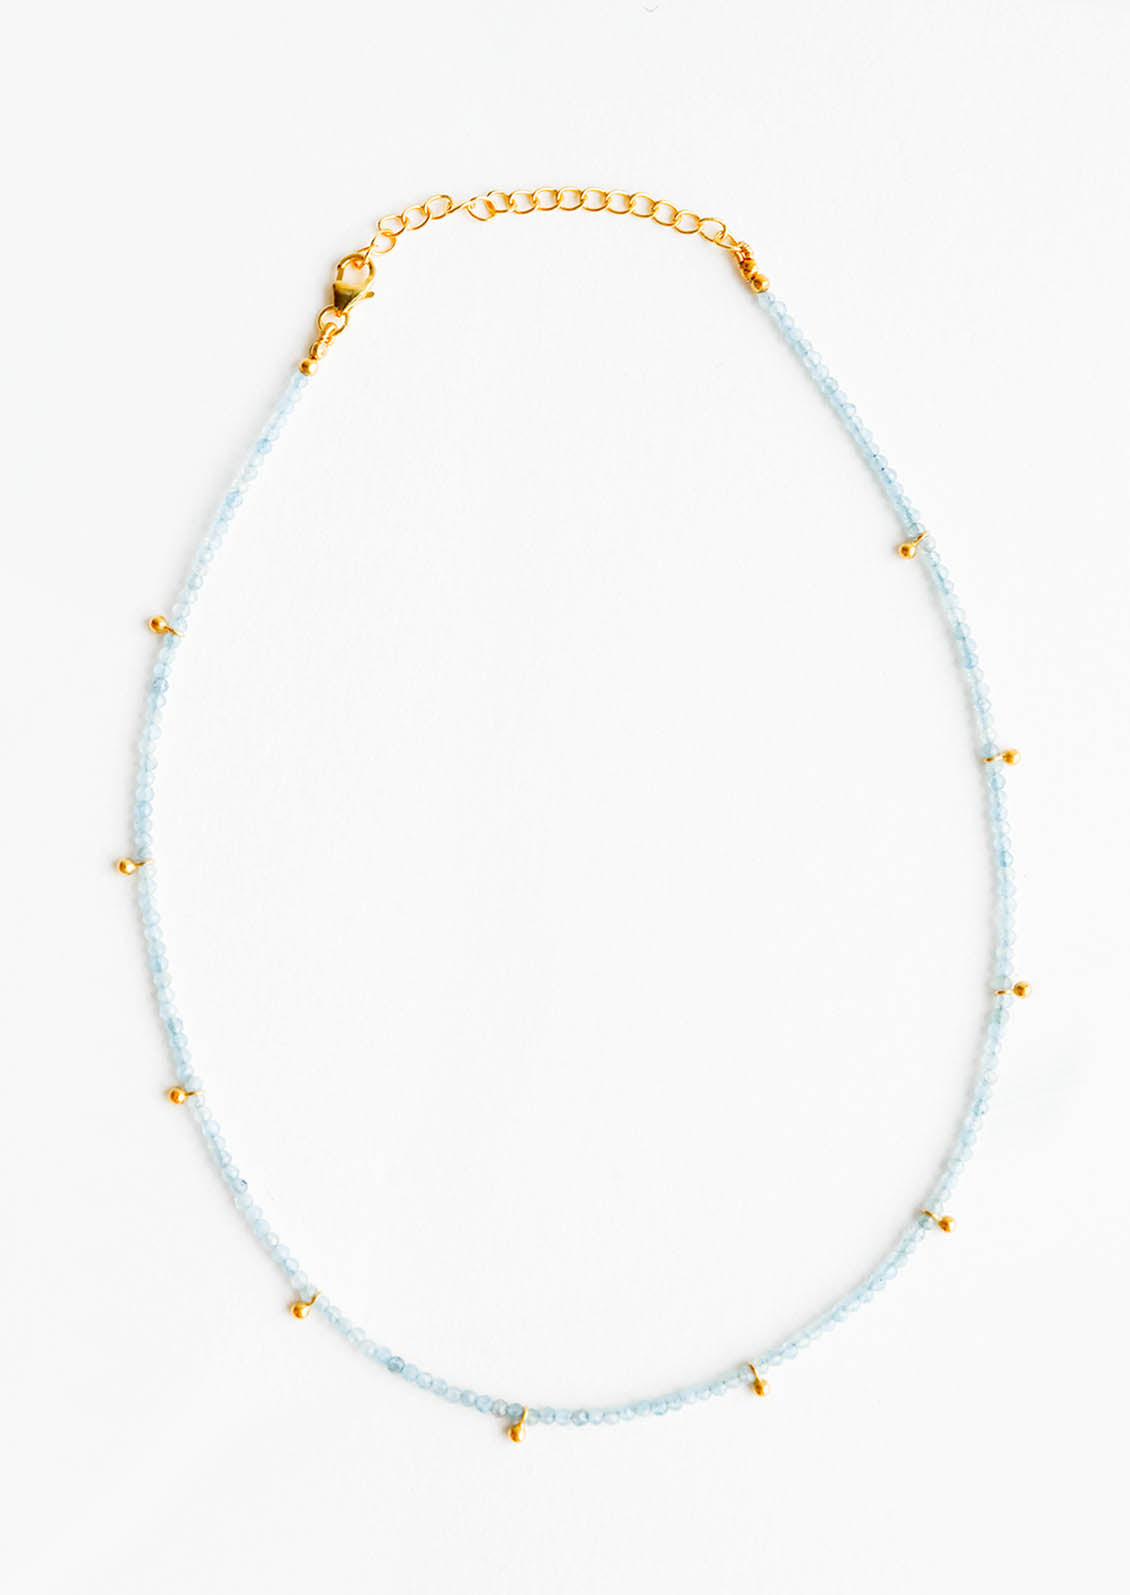 A necklace of clear blue stones with evenly spaced gold beads and a golden chain clasp.